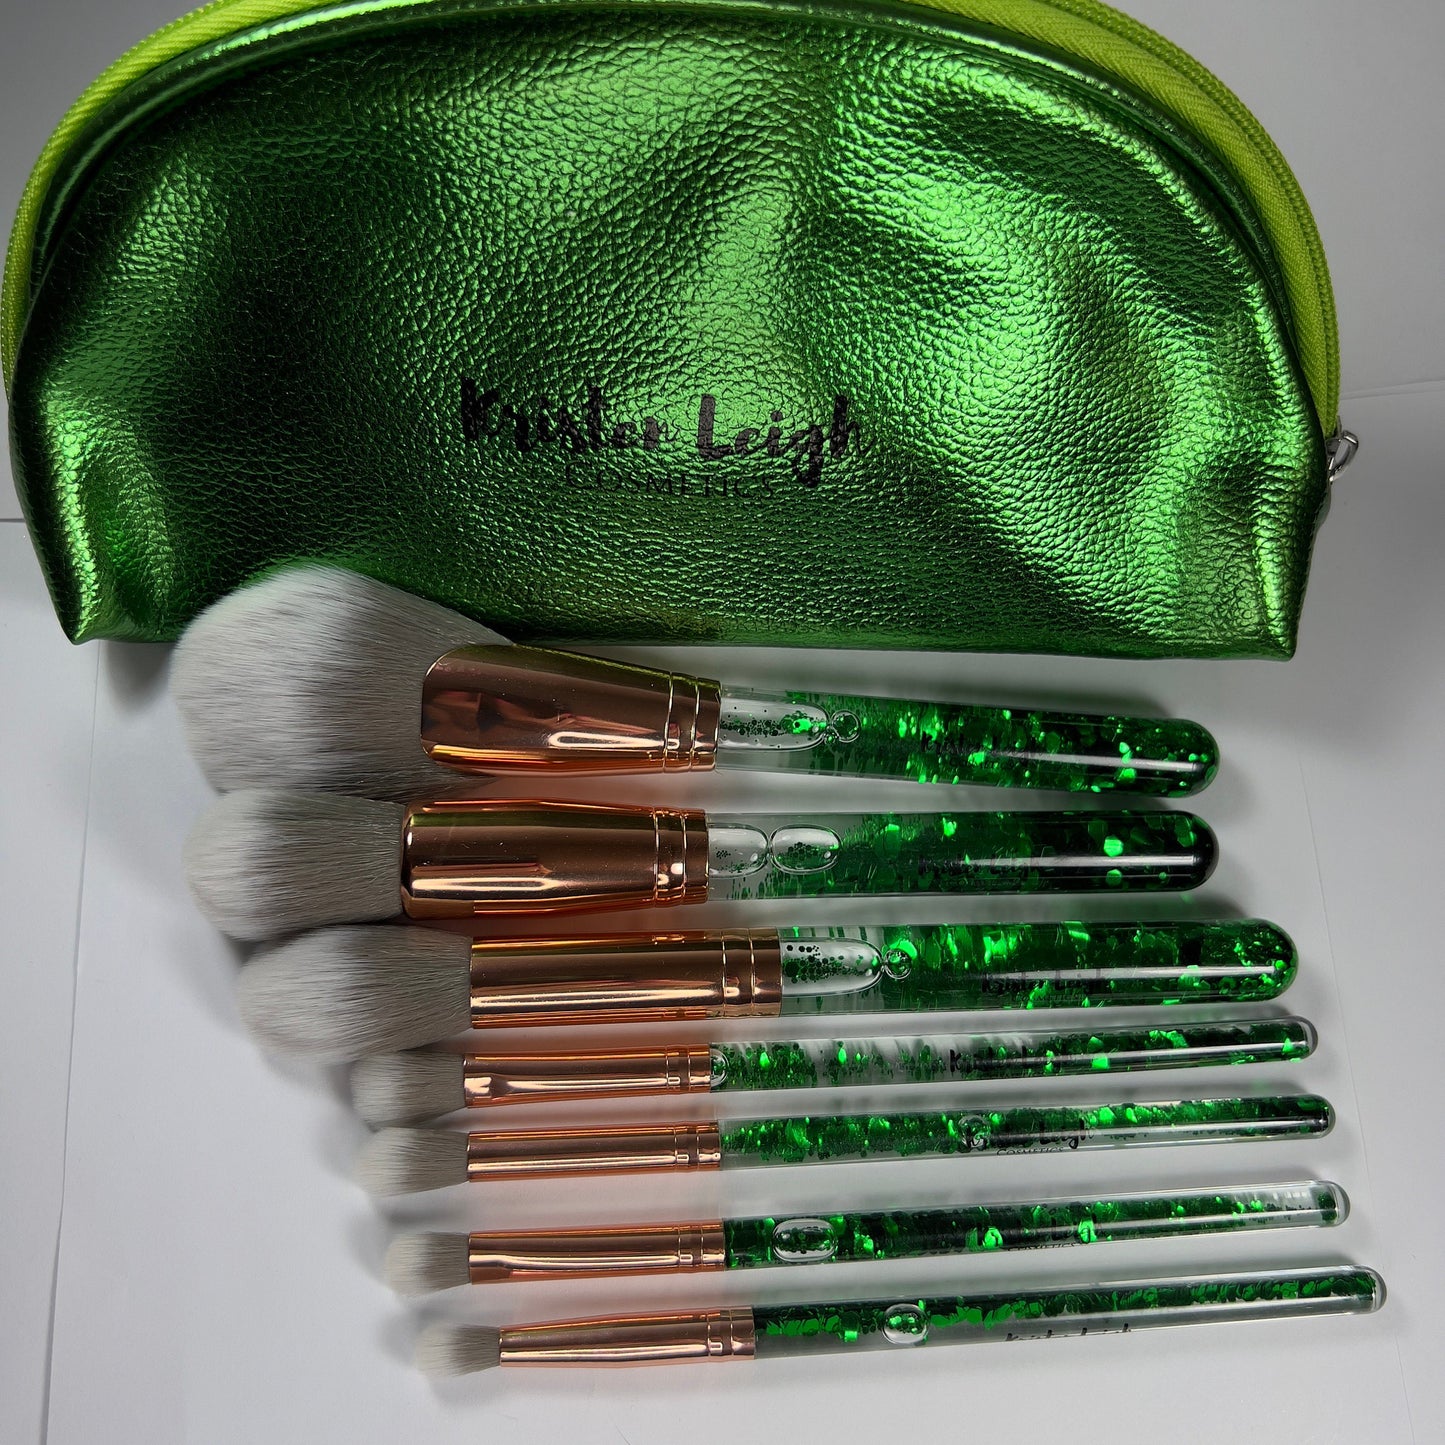 Kristen Leigh Cosmetics - Floating Green Glitter Handle - Makeup Brushes with Green Shiny Makeup Bag